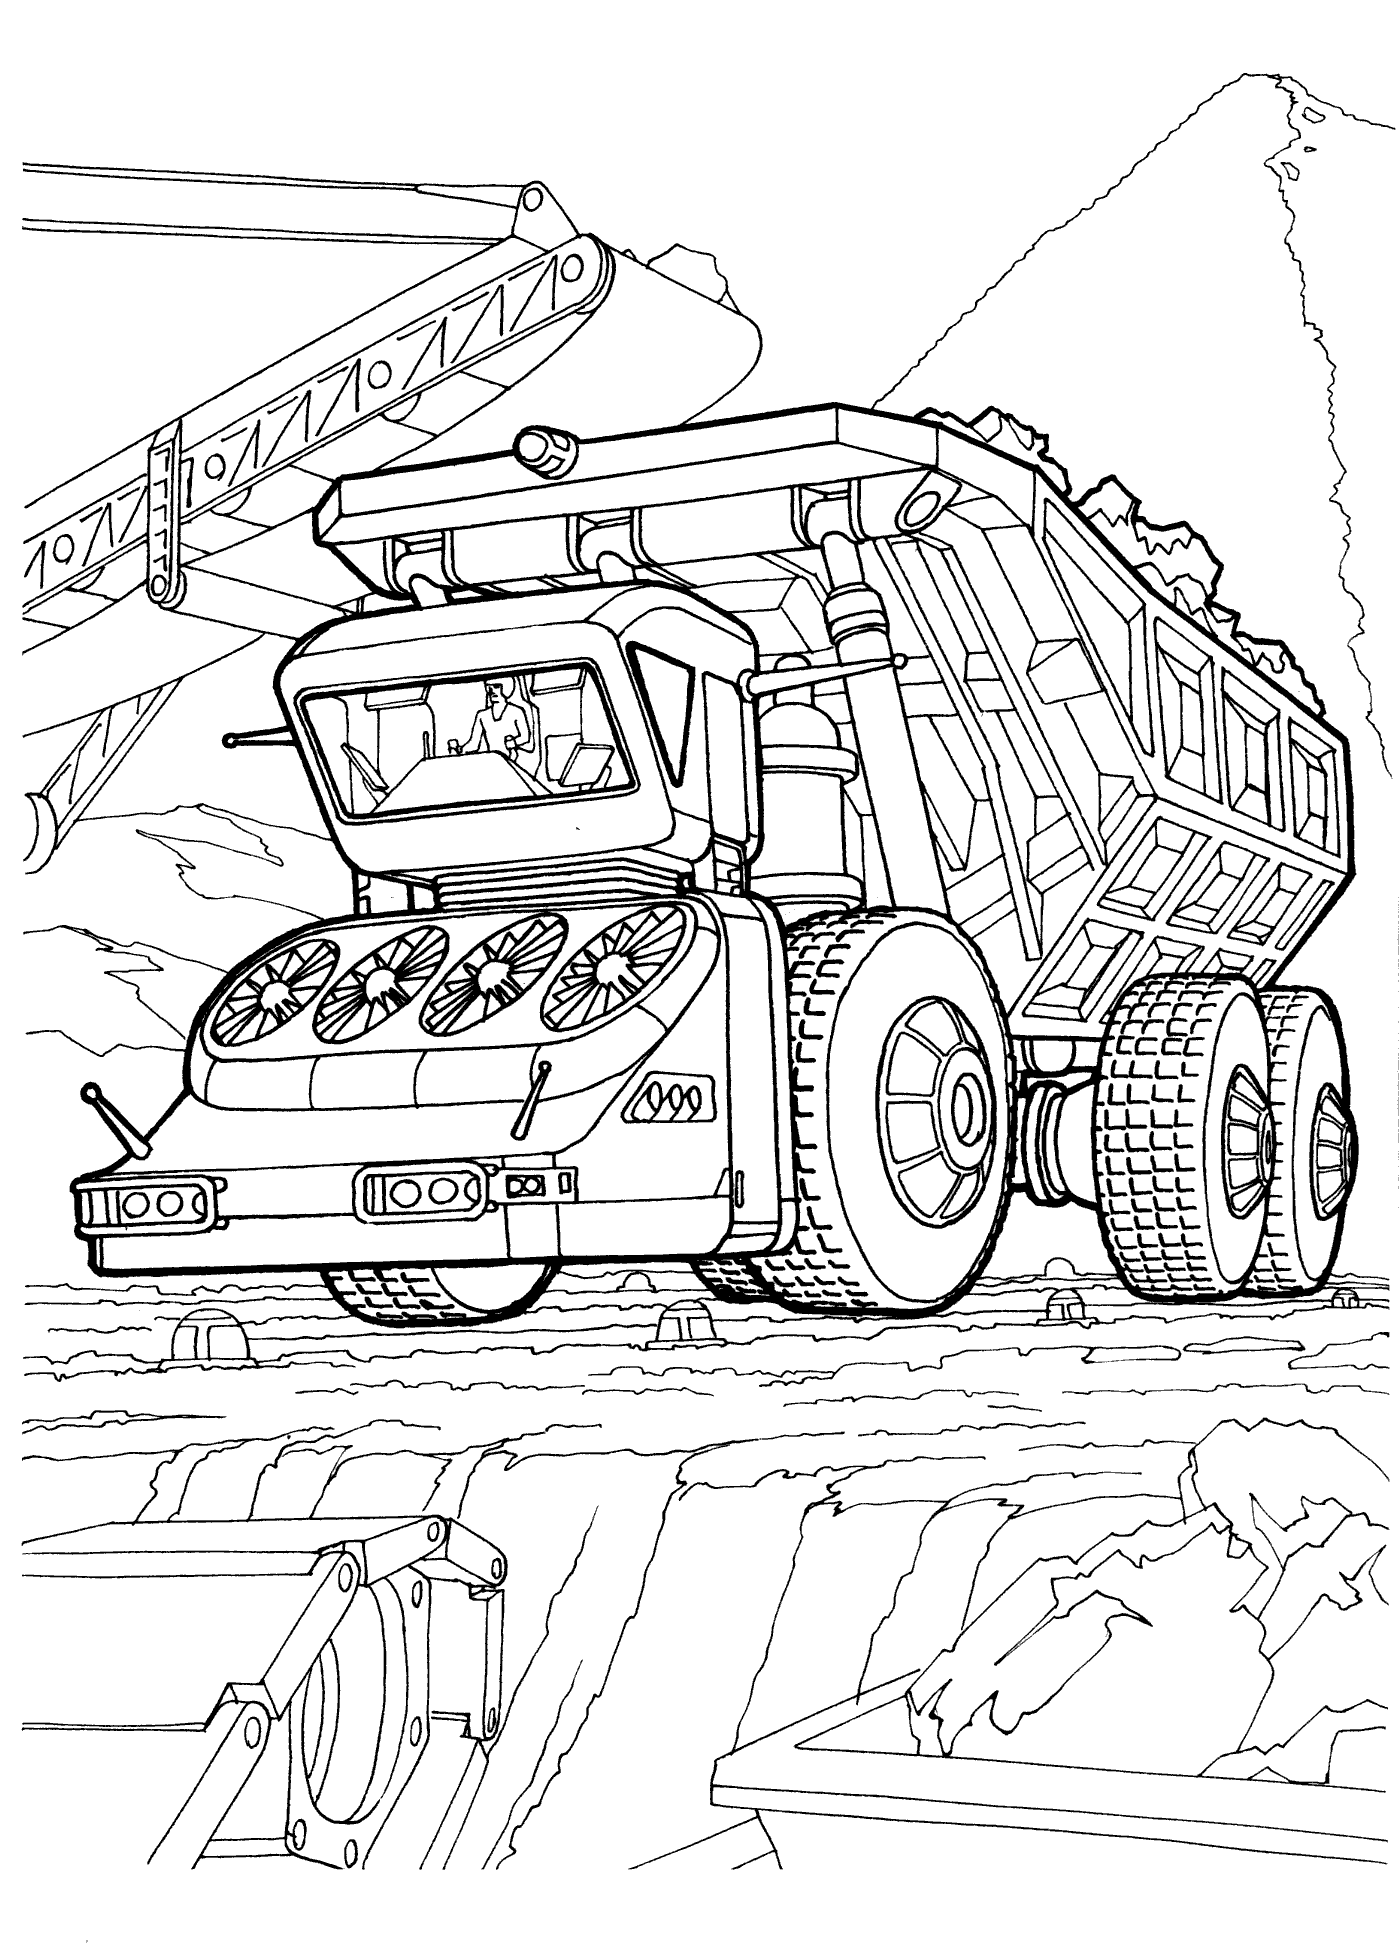 Coloring page - Truck